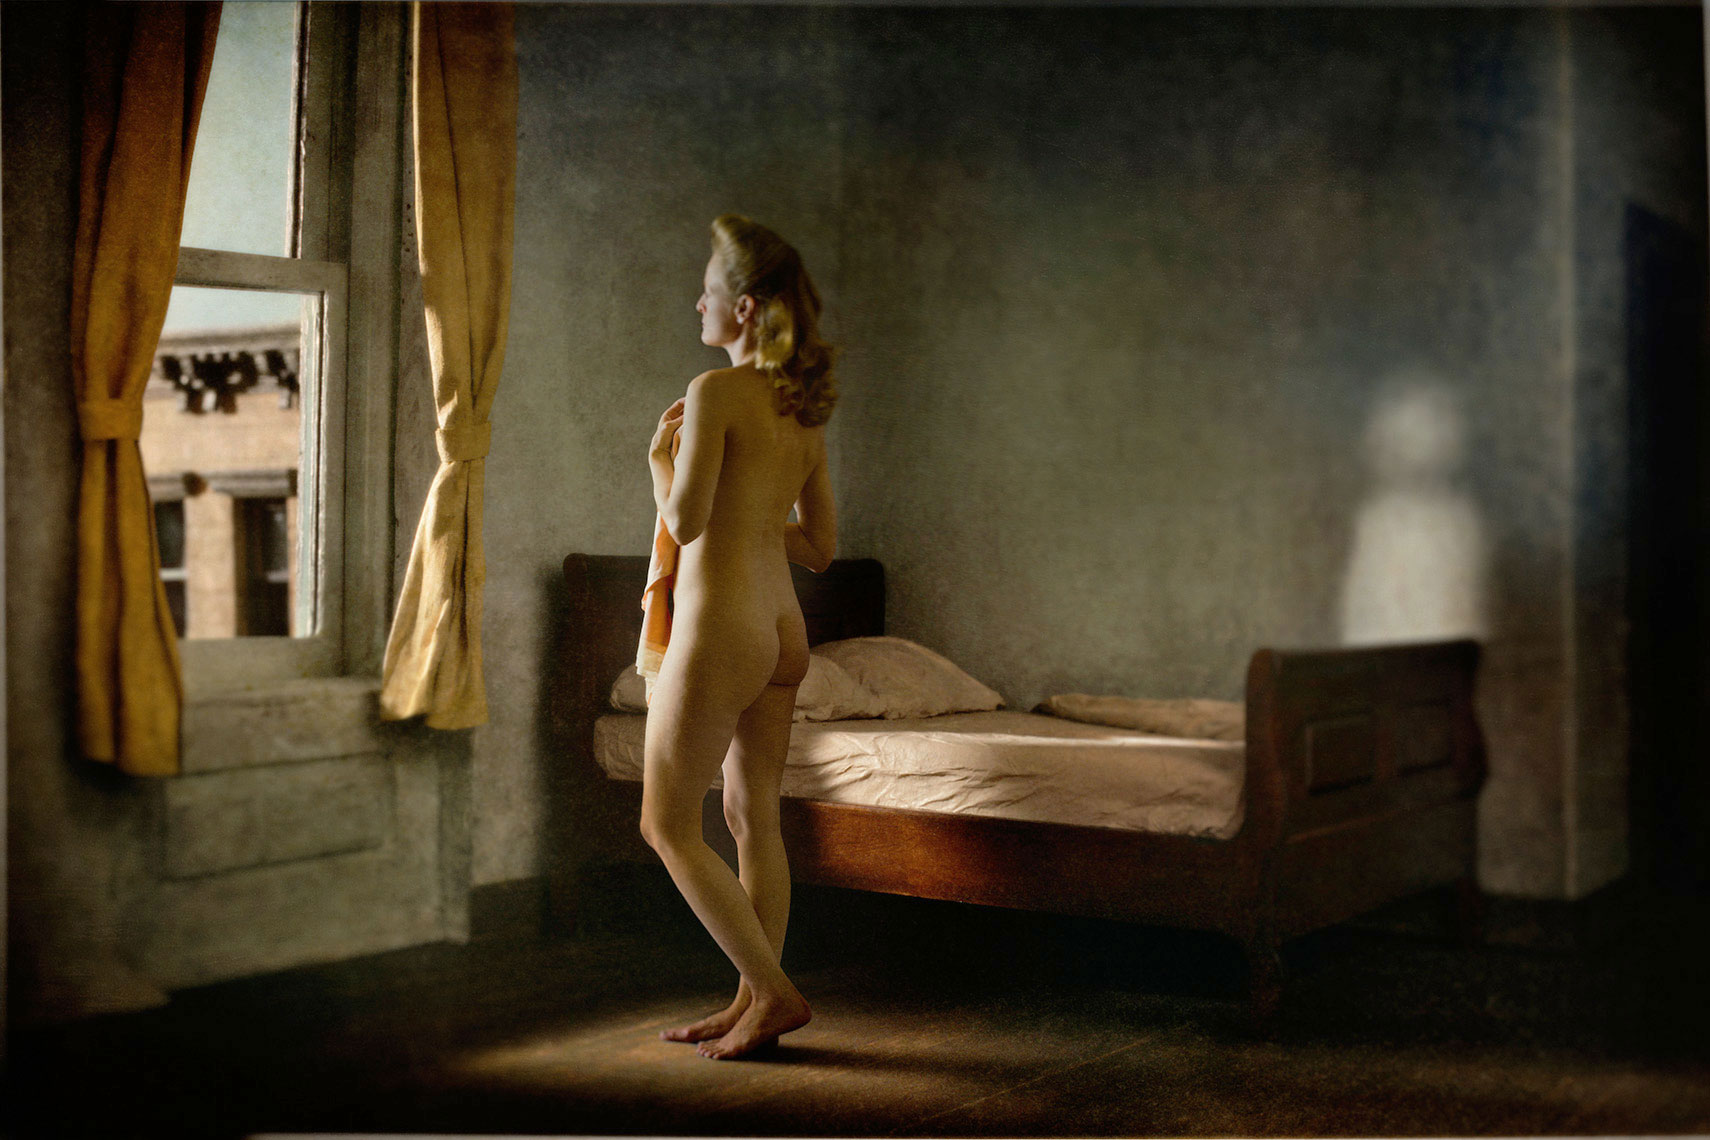 A photomontage homage to Edward Hopper’s painting, “Morning in a City”, set in a 1940s’ New York apartment bedroom, a nude melancholic blonde woman, covering the front of her torso with a garment, and standing next to an unmade bed, gazes in contemplation out the window onto the urban landscape.